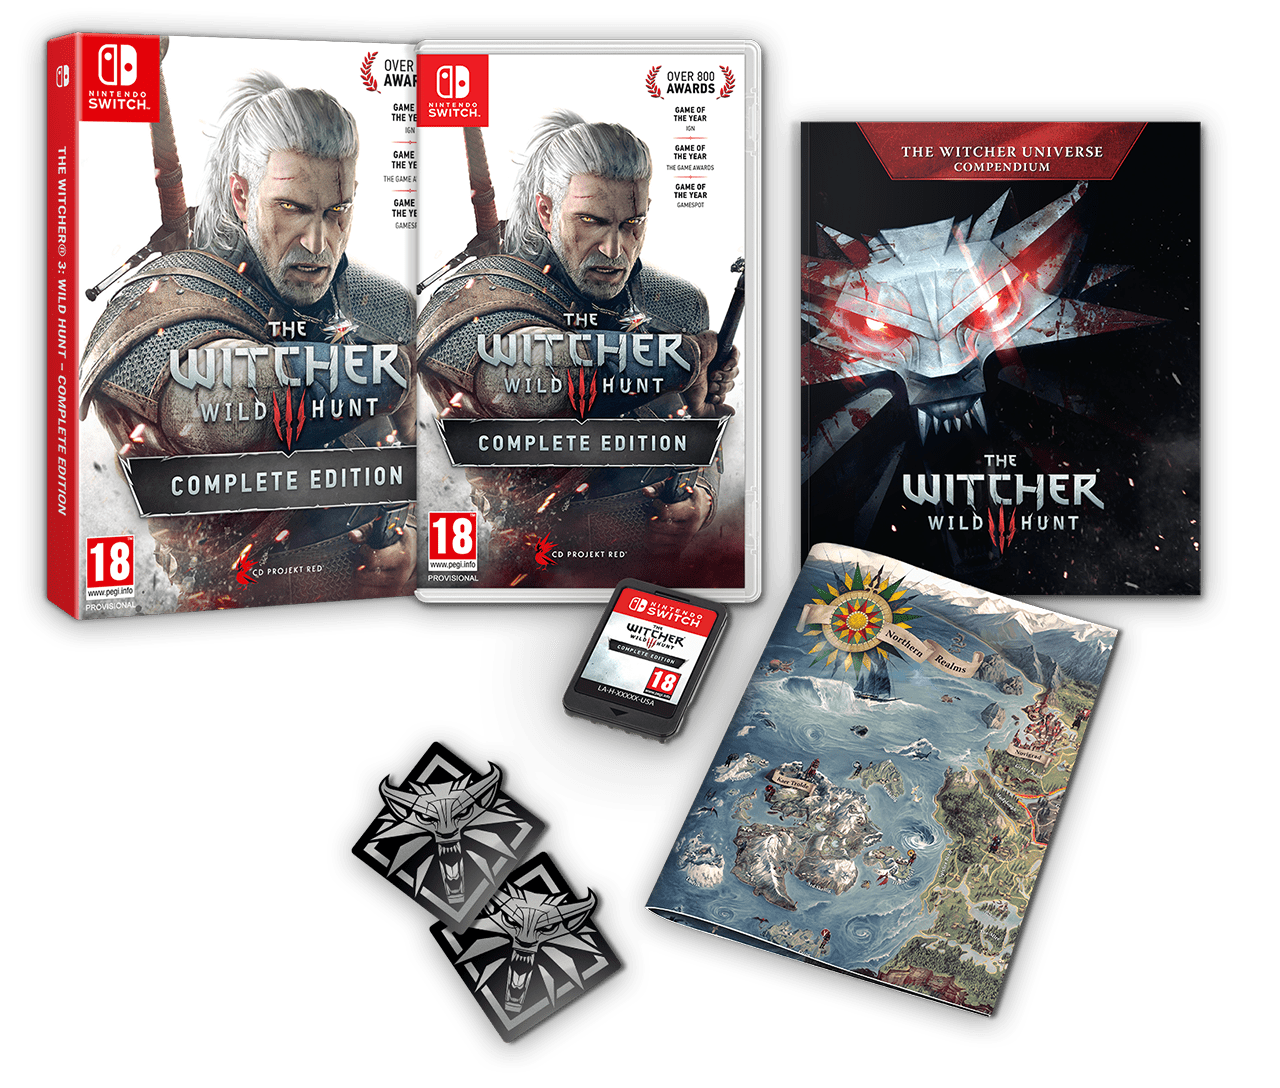 the-witcher-3-complete-edition-now-available-on-switch-rpgamer